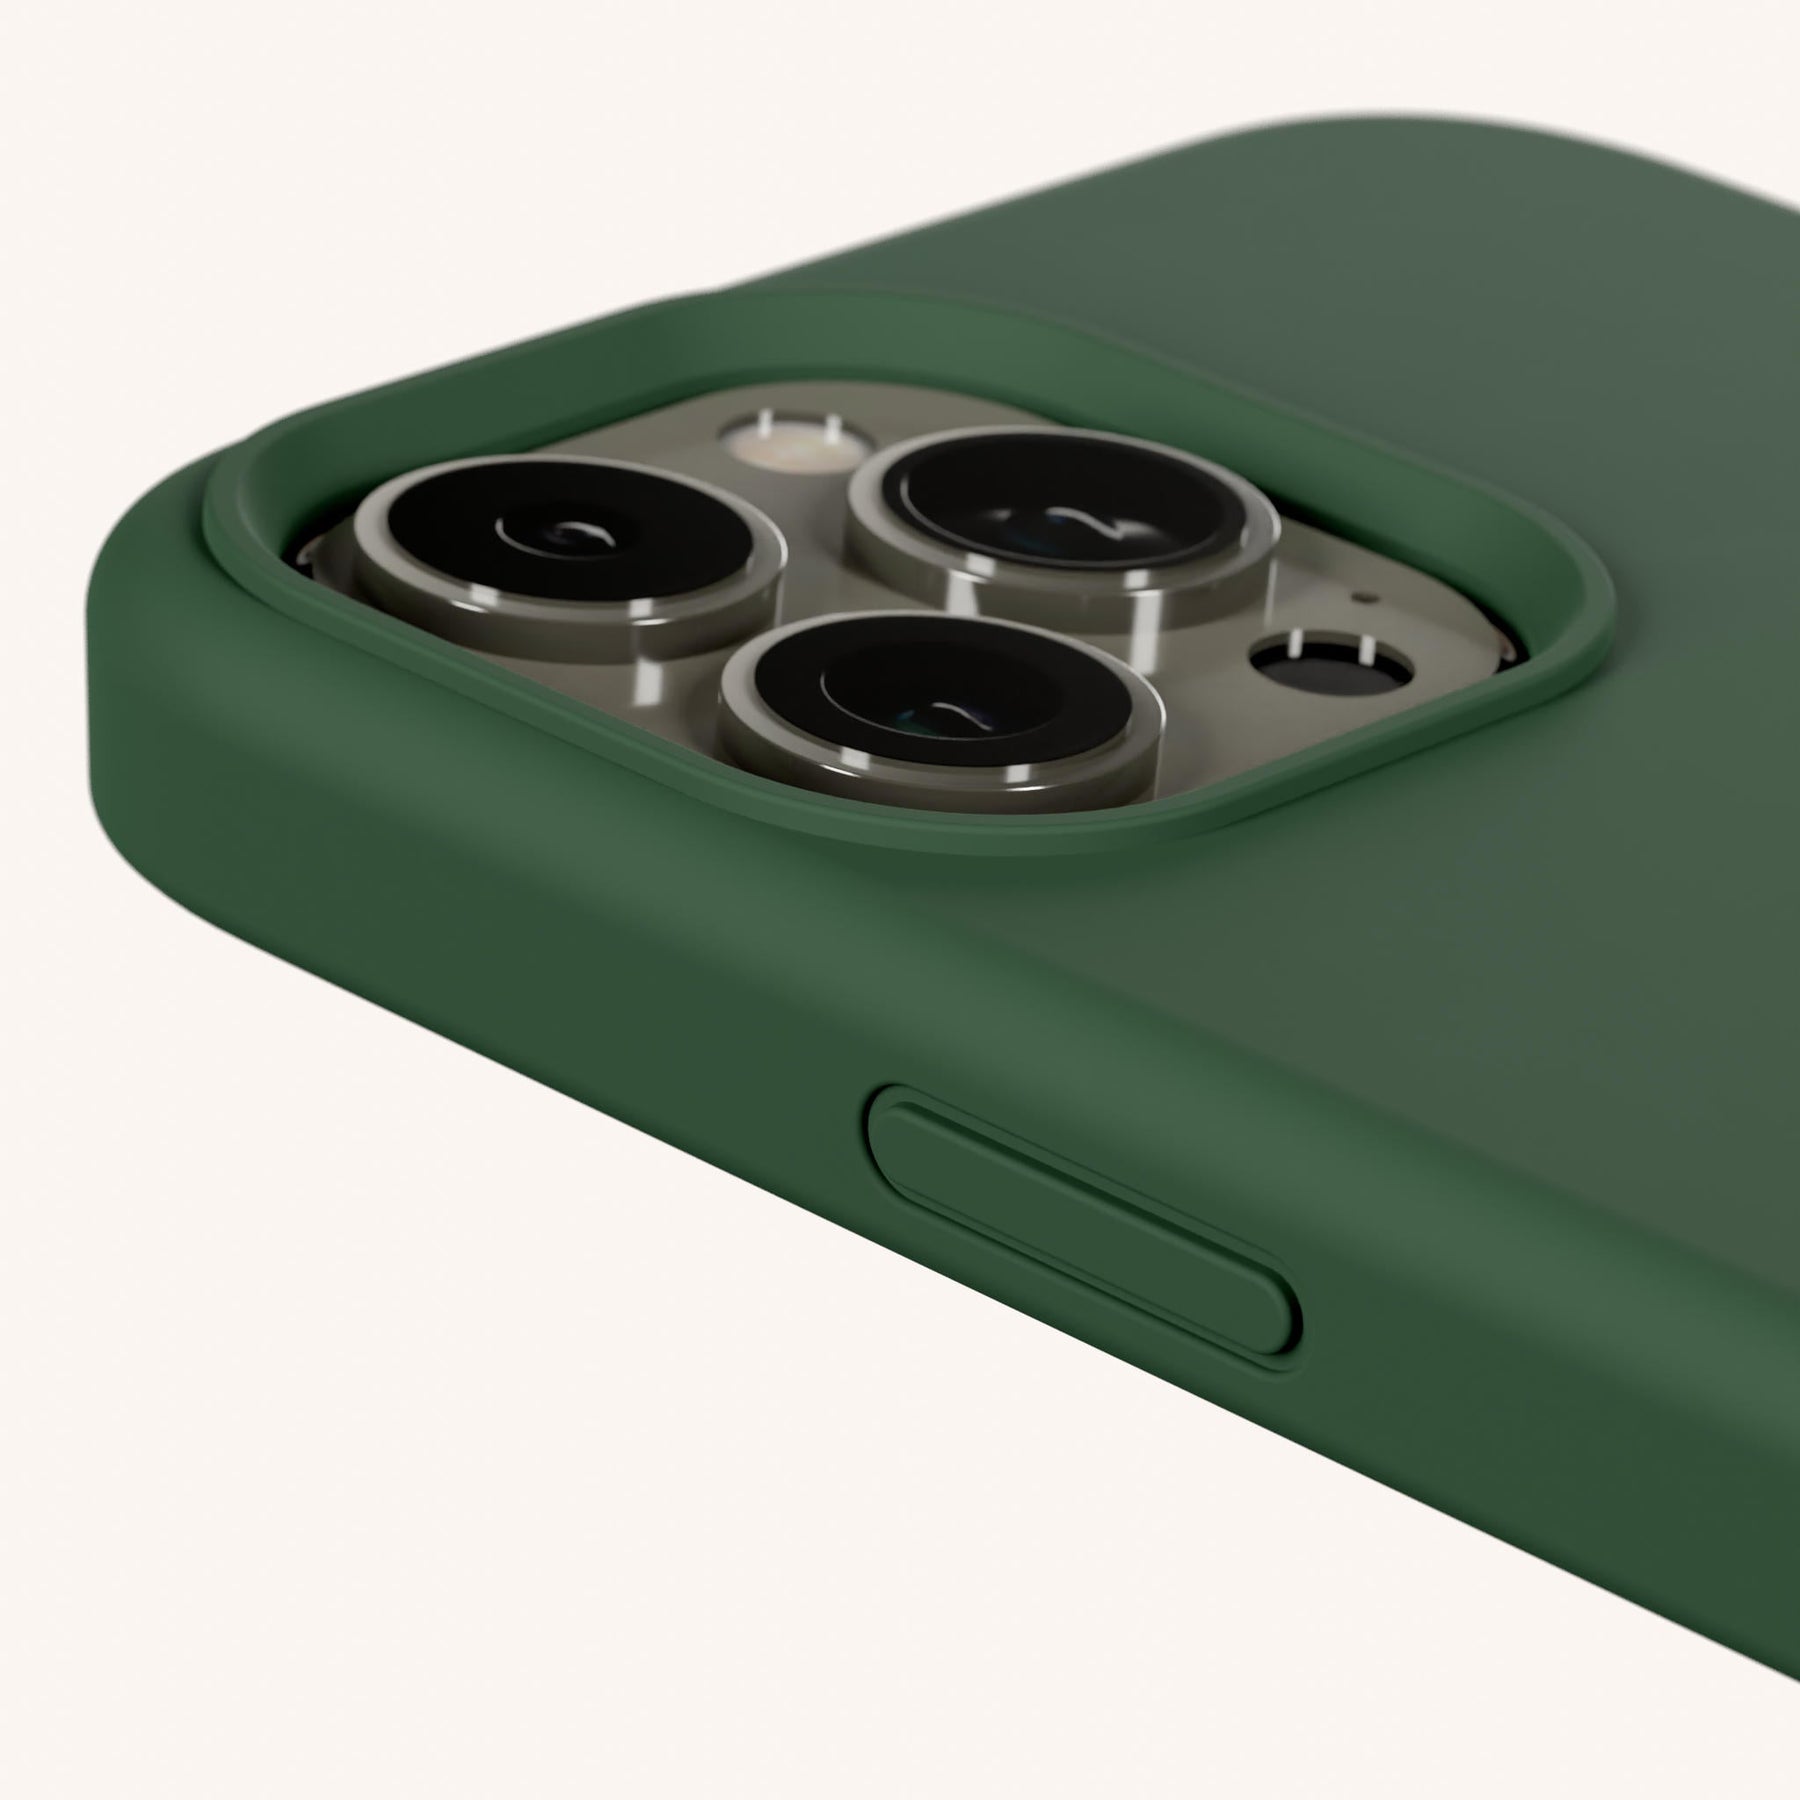 Phone Case with Eyelets in sage